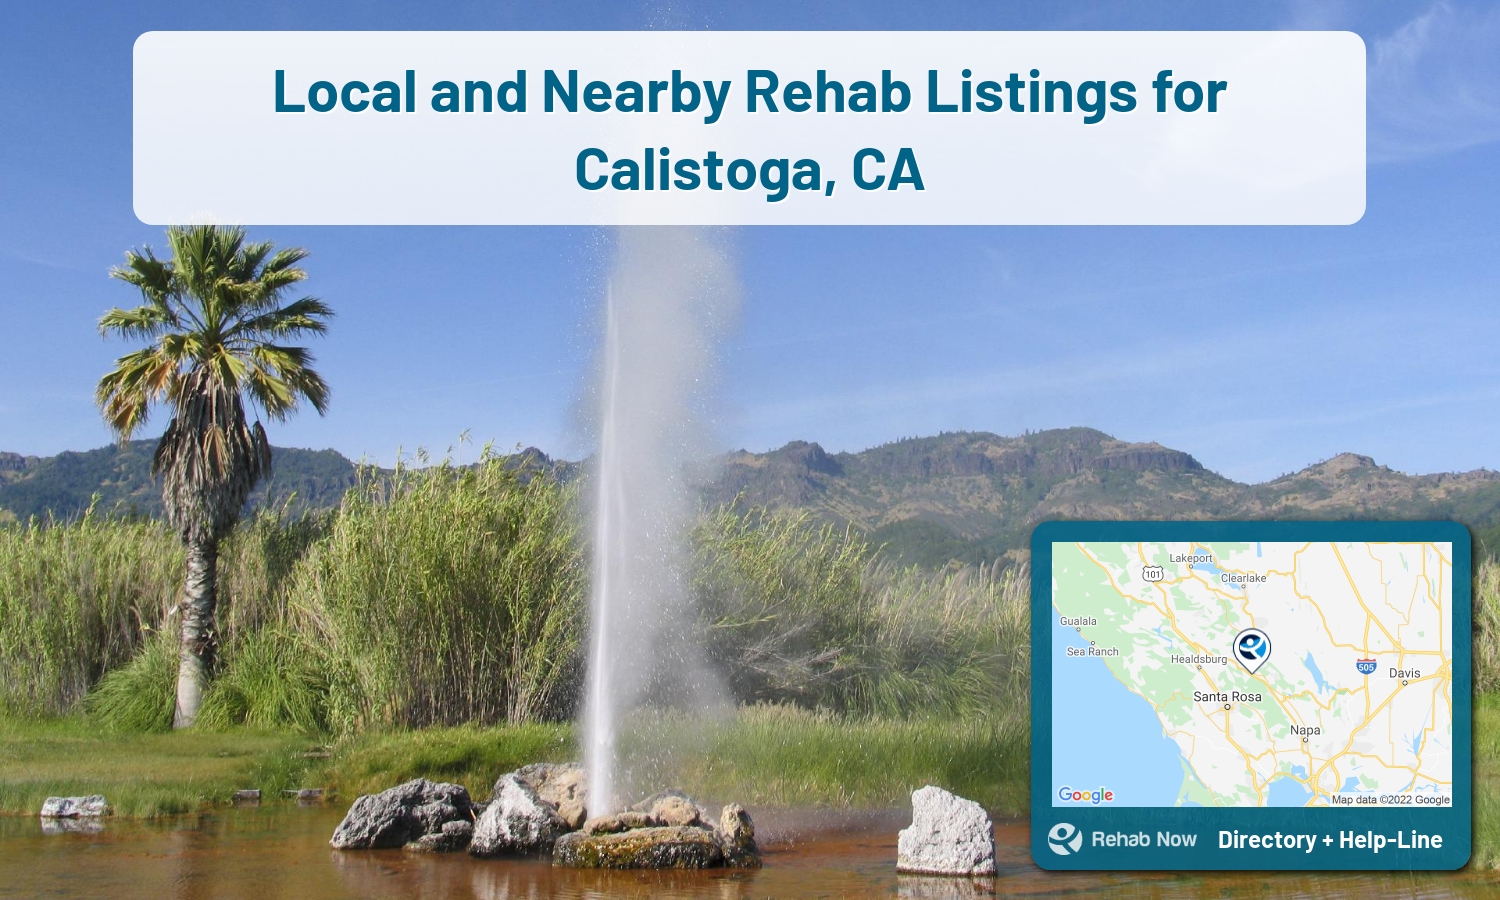 Let our expert counselors help find the best addiction treatment in Calistoga, California for you or a loved one now with a free call to our hotline.